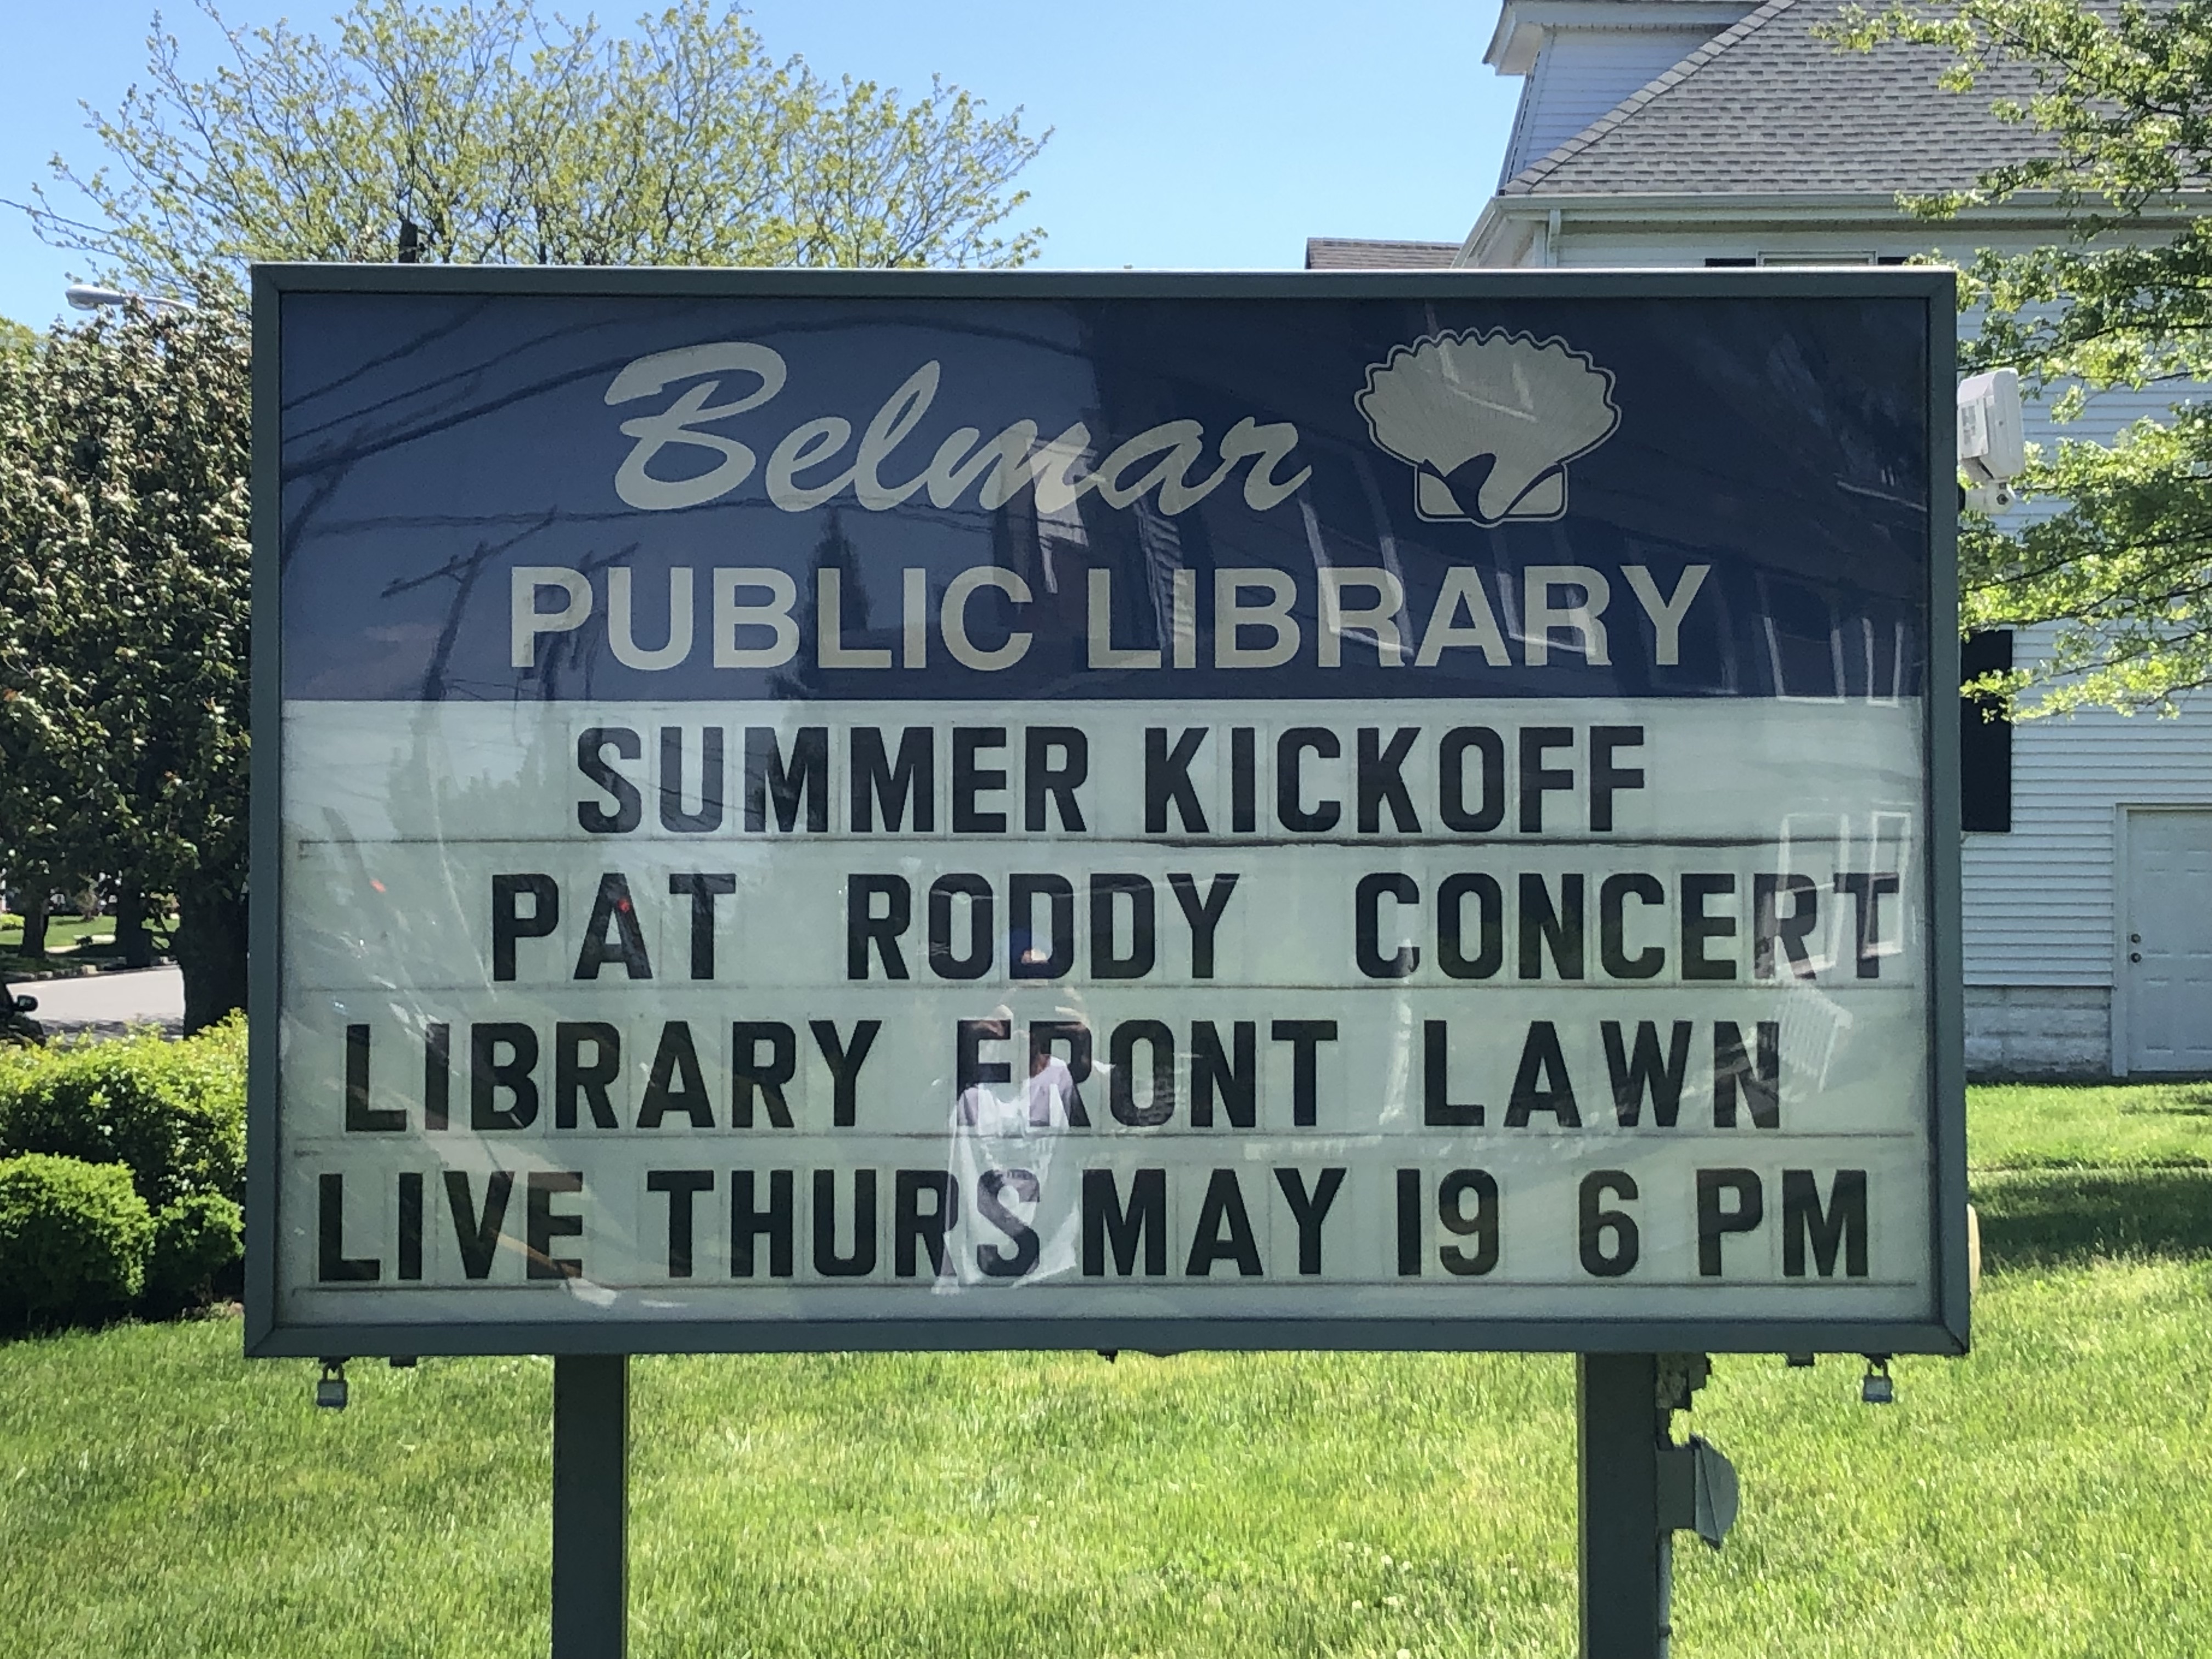 Roddy Band to play on library front lawn